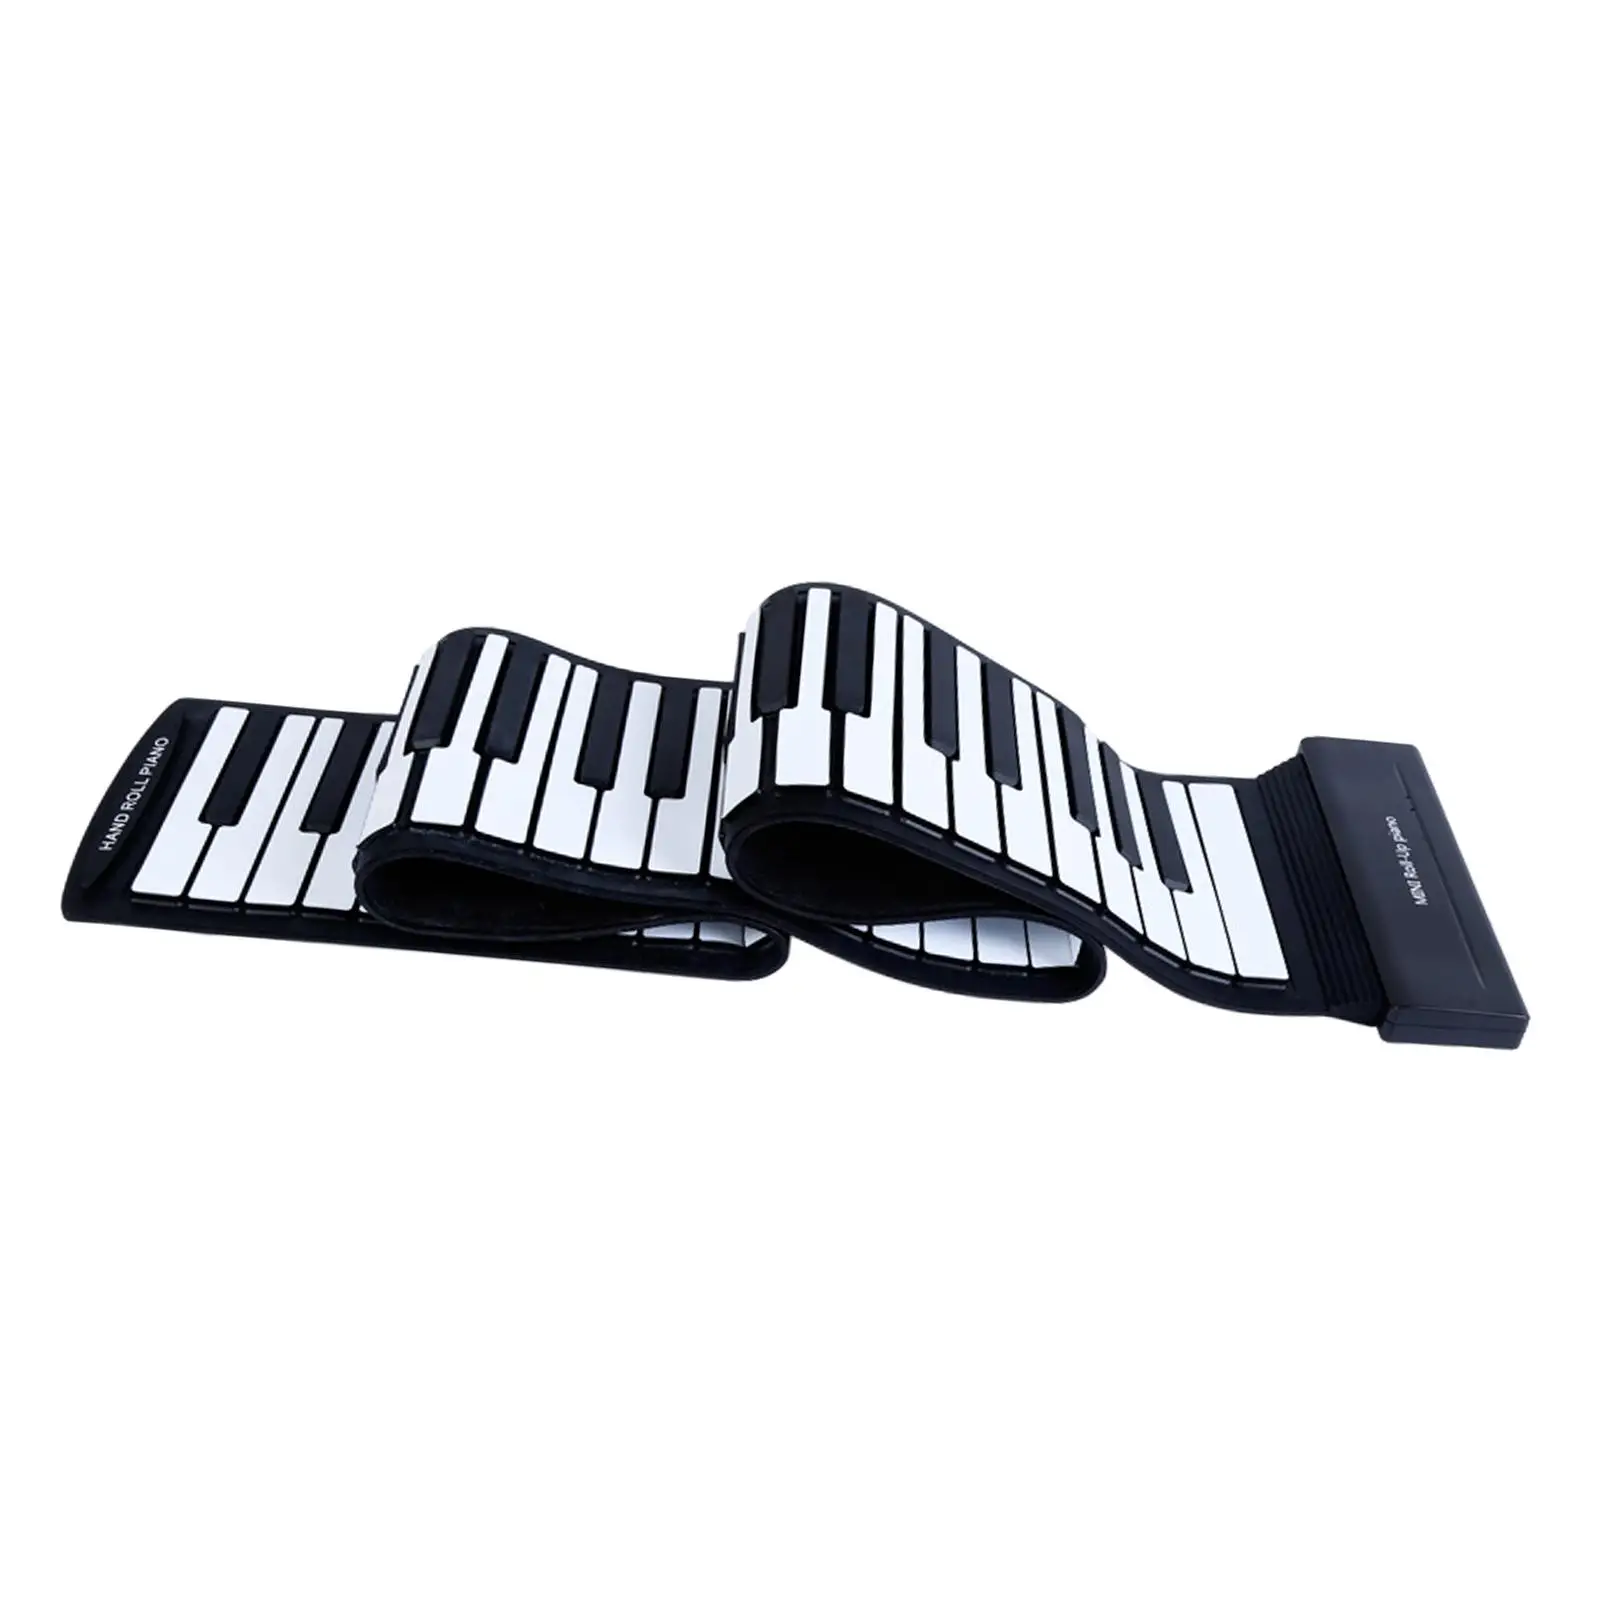 

88 Keys Roll up Flexible Piano Roll Out Keyboard Piano for Programming Recording Classroom Teaching Living Room Beginner